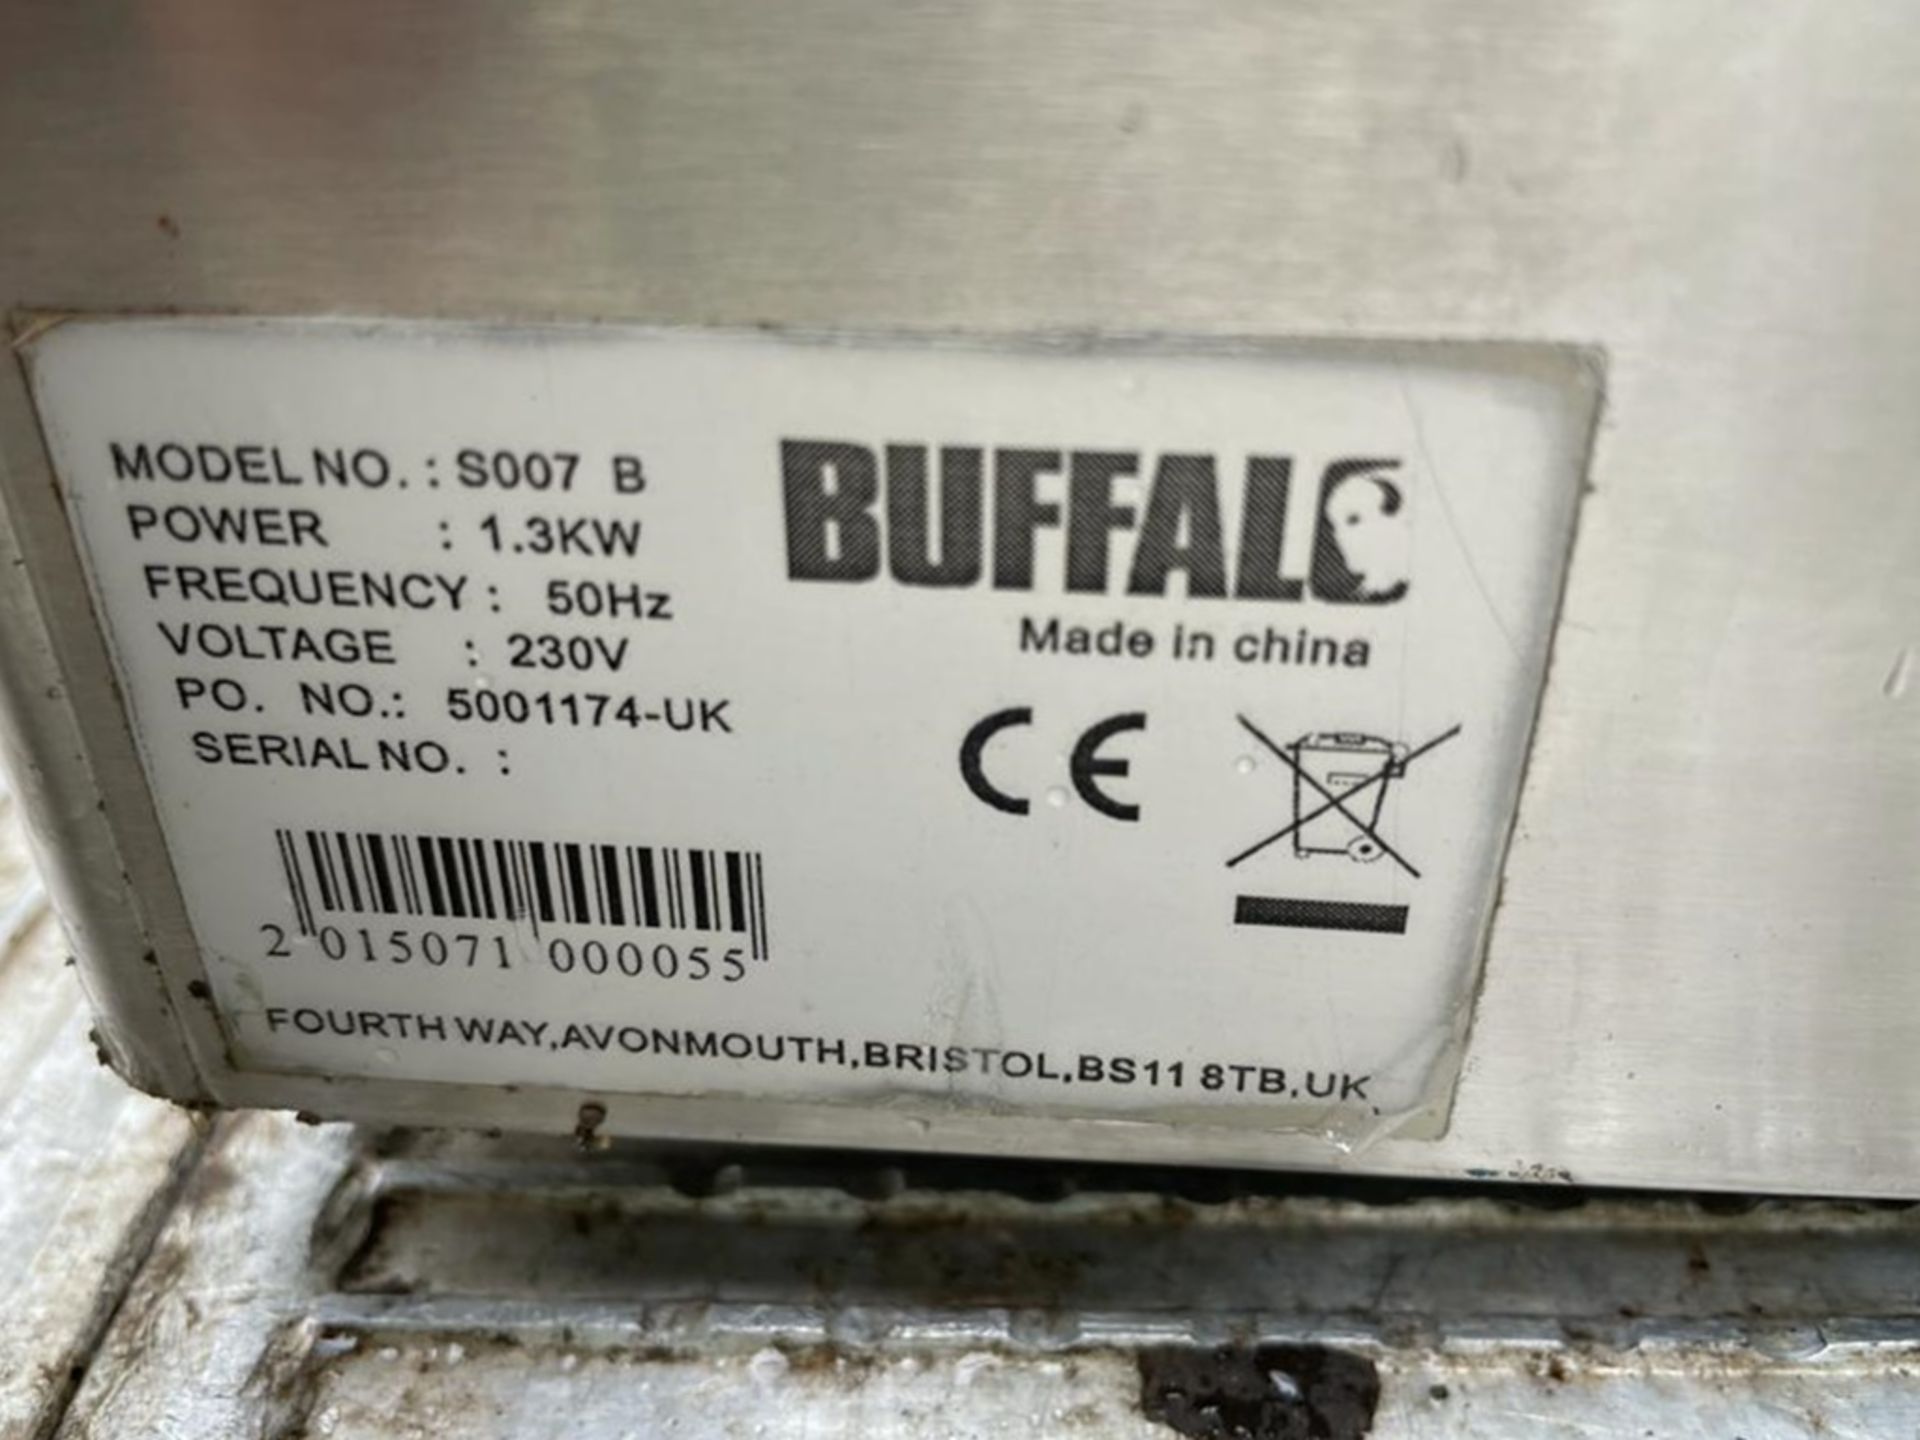 1 x Buffalo S007 Countertop Bain Marie With Stainless Steel Exterior and Gastro Pan - 240v - CL667 - - Image 2 of 2